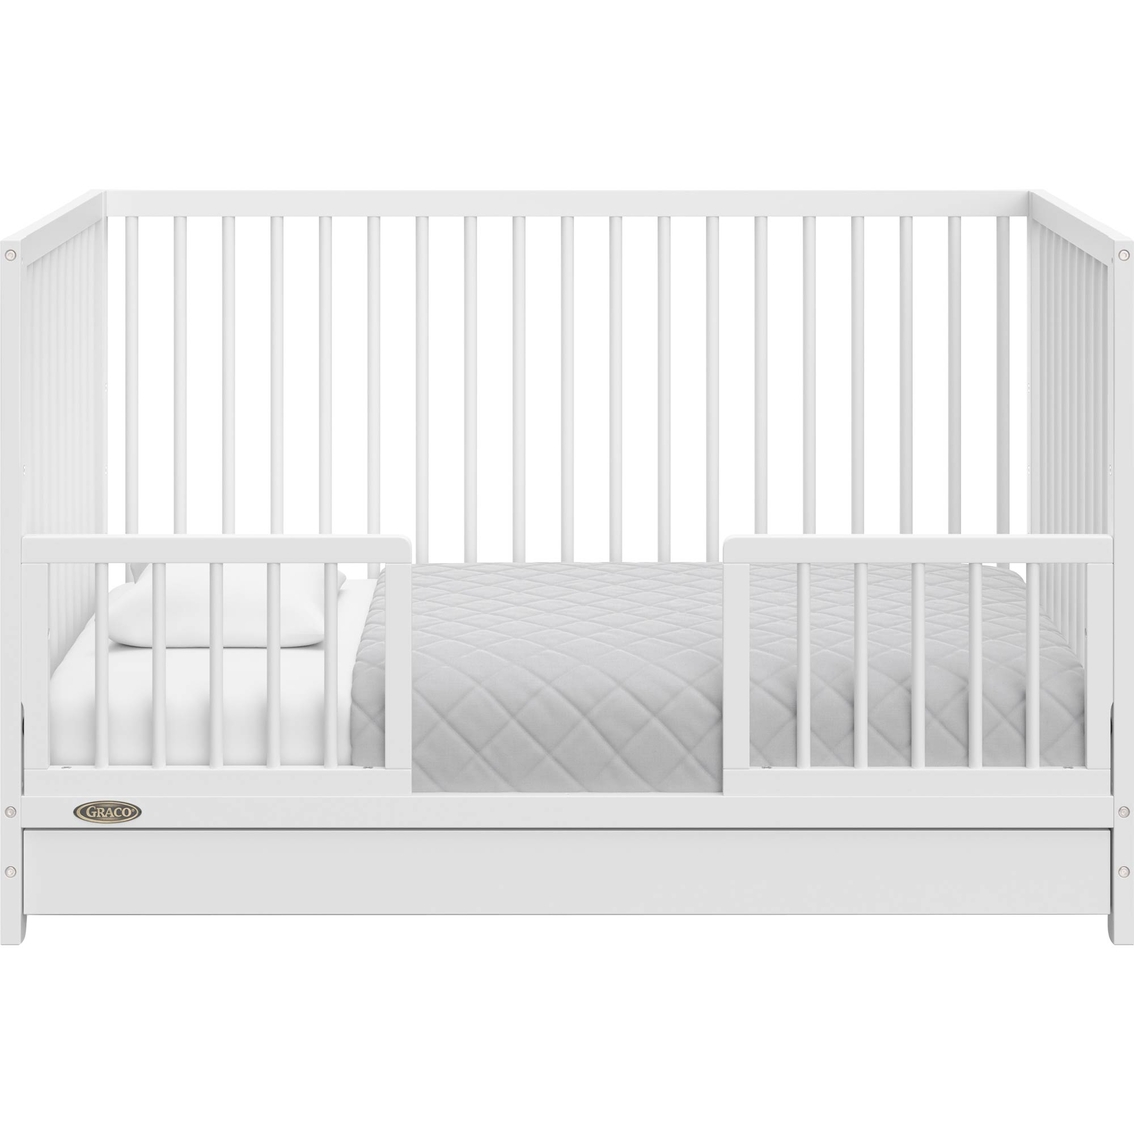 Graco Teddi 5 in 1 Convertible Crib with Drawer - Image 2 of 7